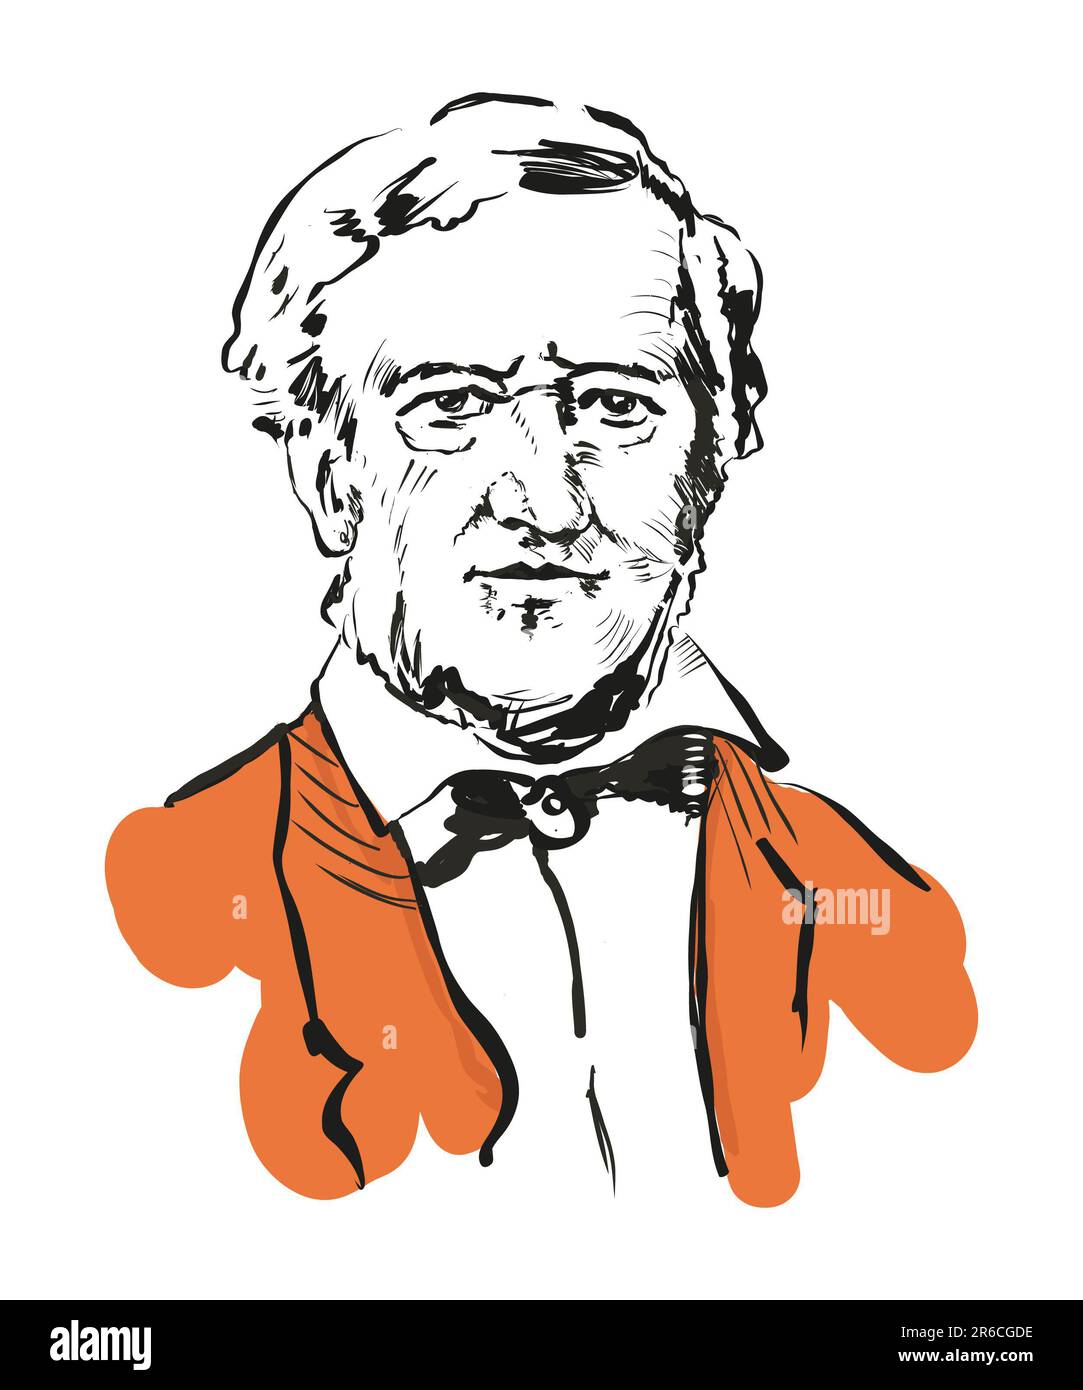 Richard Wagner portrait image, vector illustration, black and white hand drawn sketch isolated on white background Stock Photo